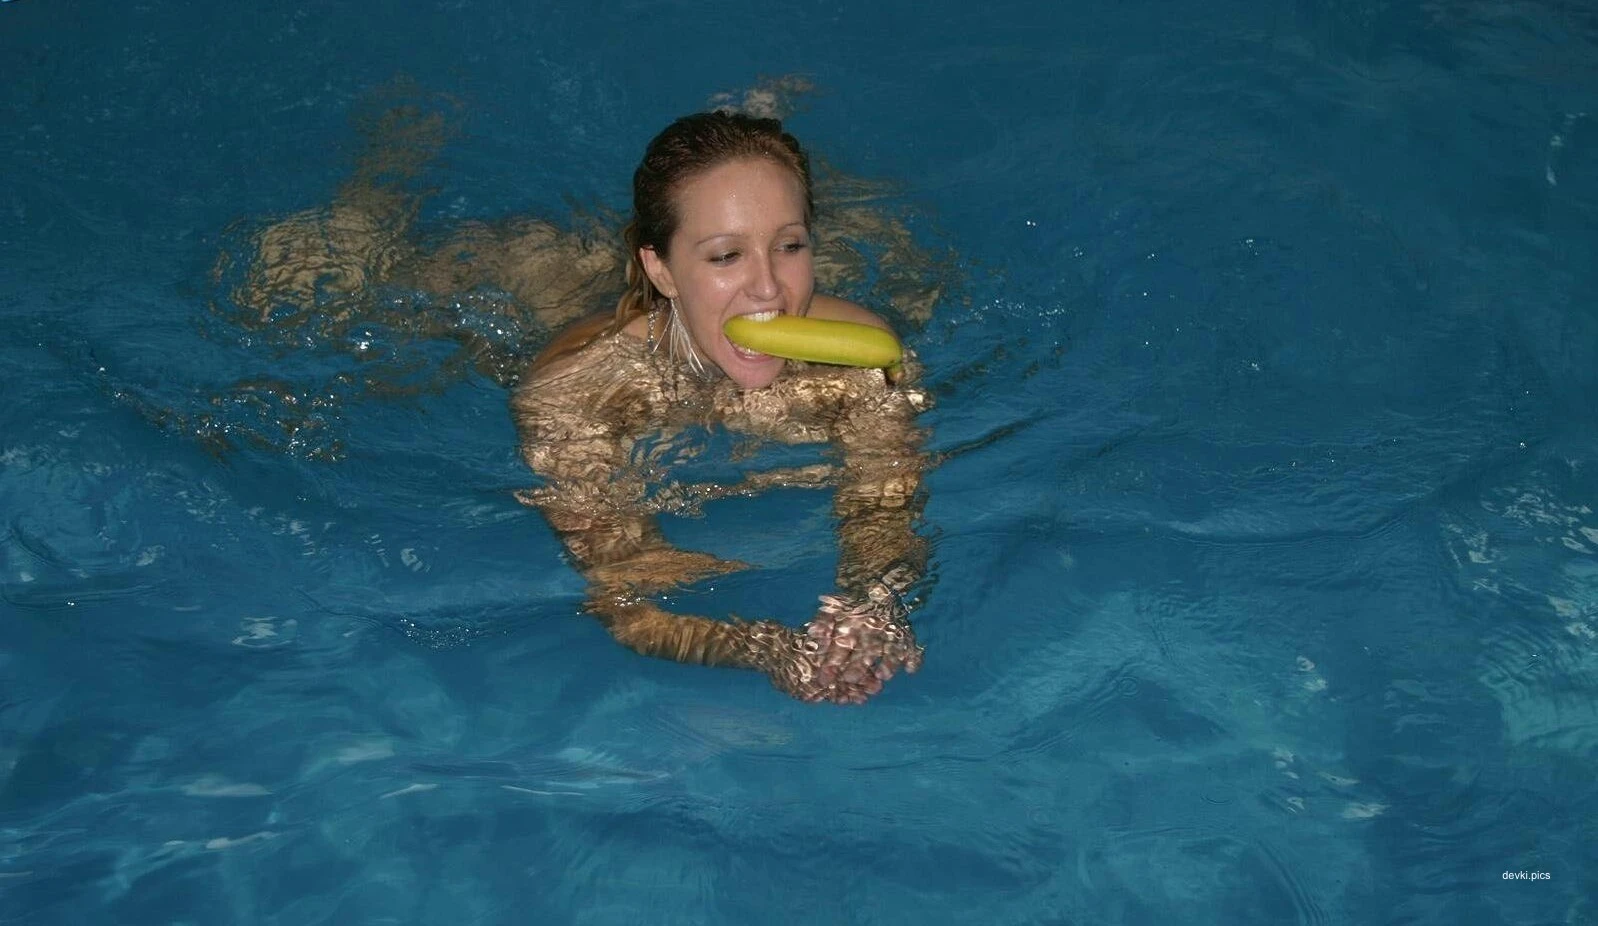 Oral sex in the pool